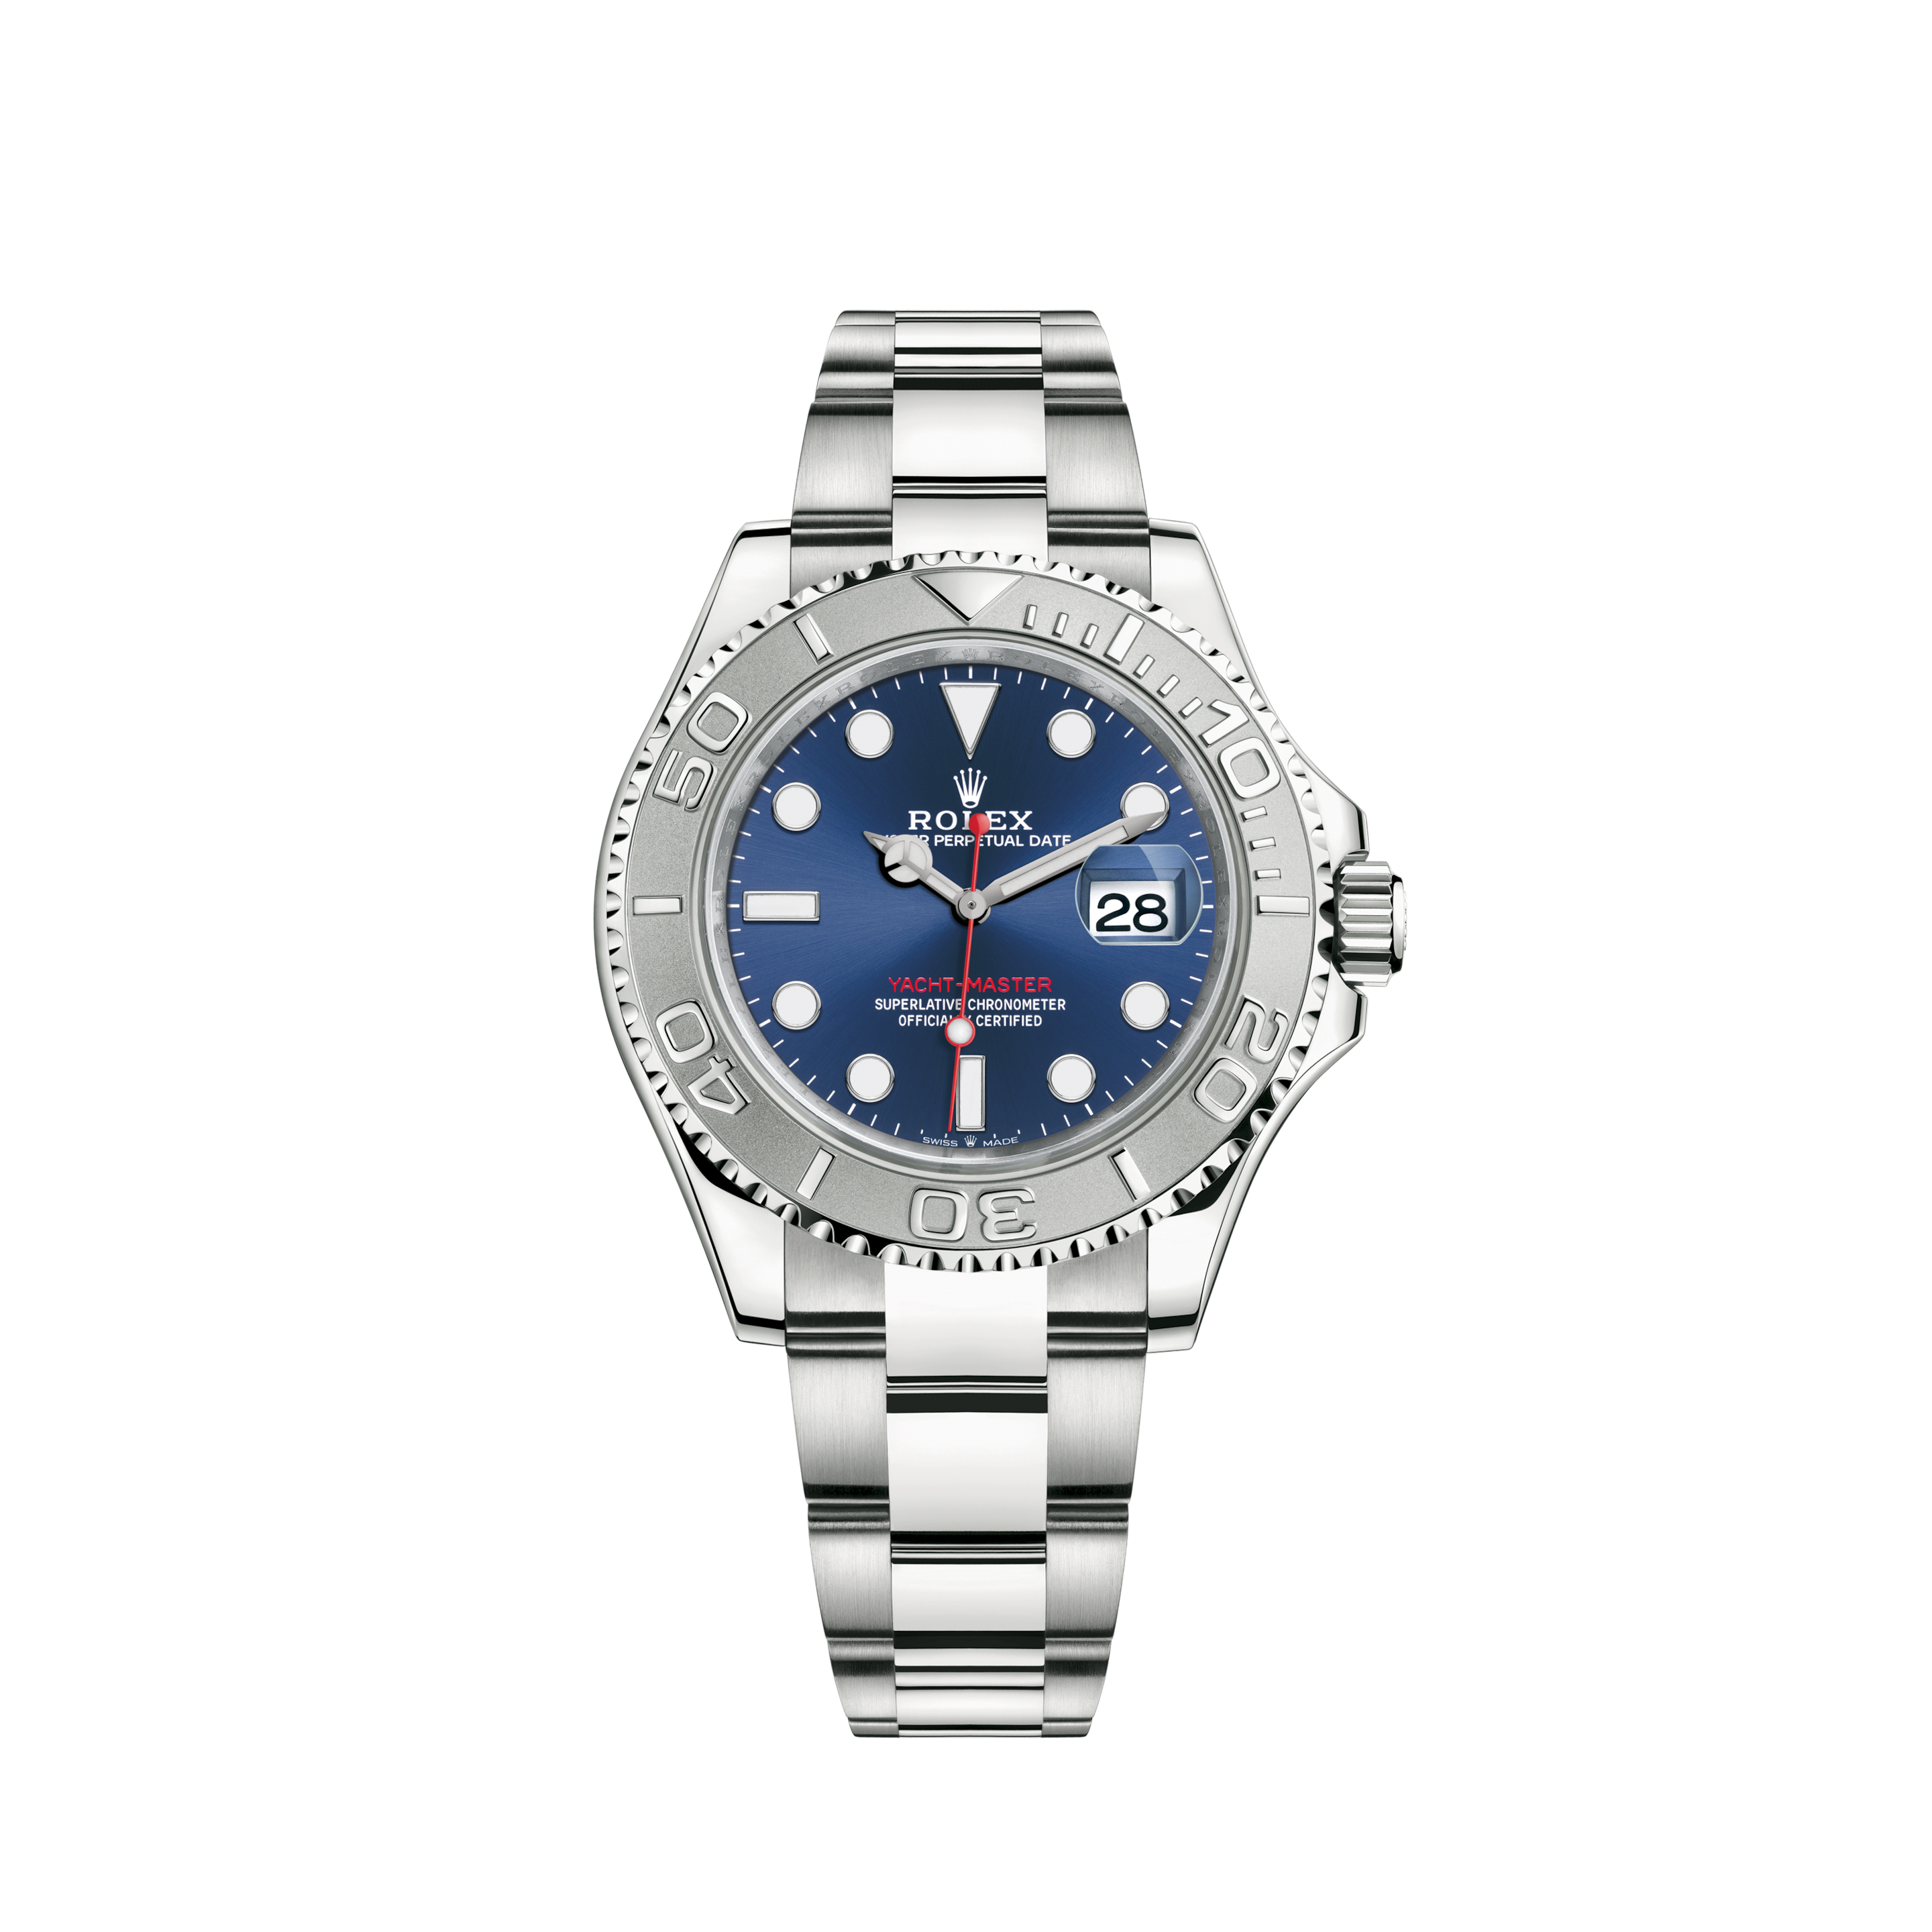 Rolex Date 34 Automatic Stainless Steel Men's Watch Oyster Perpetual Ref. 1501Rolex Date 34 Automatic Stainless Steel Men's Watch Oyster Perpetual Ref. 15200